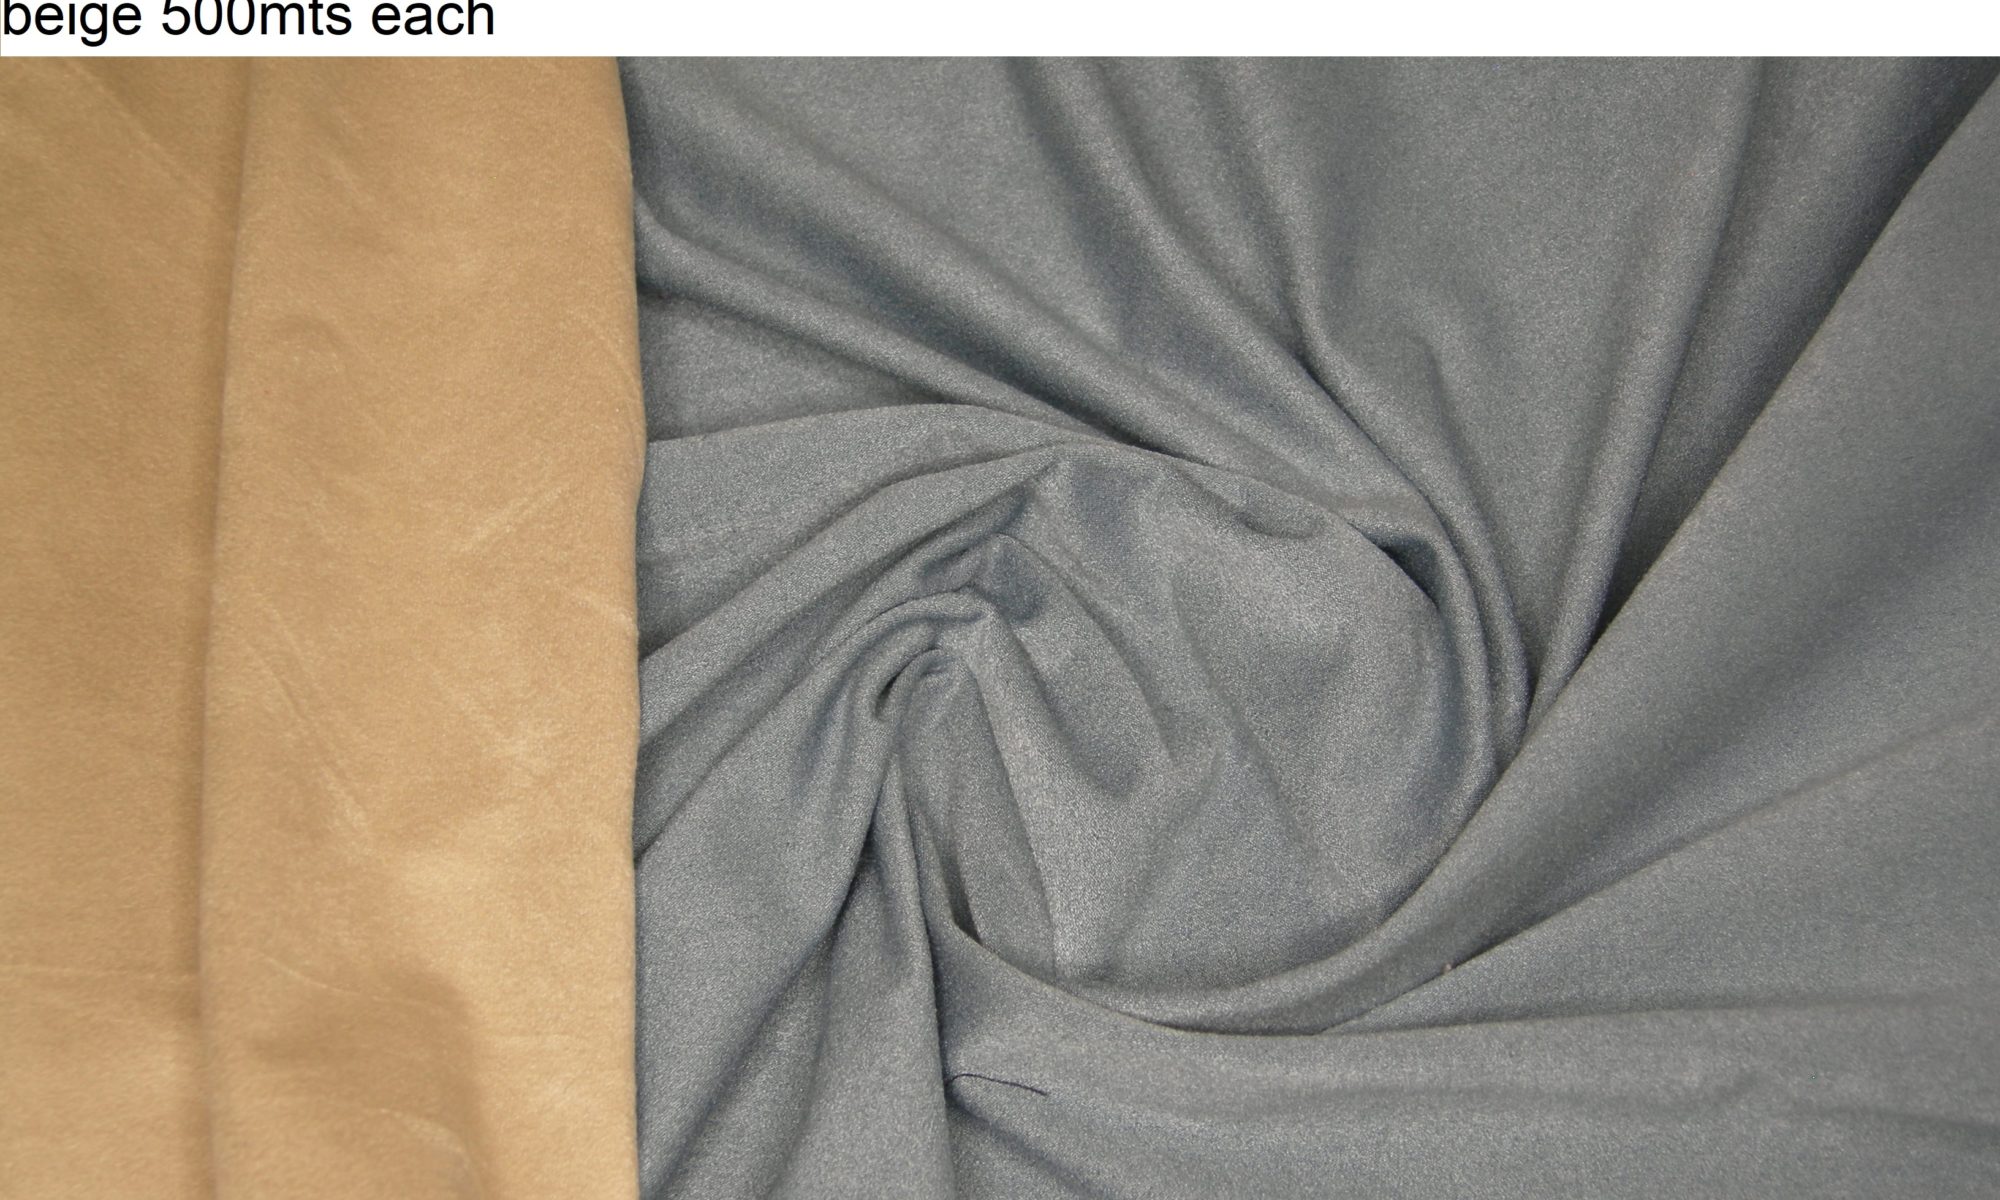 7743 jersey knit suede jacket skirt trousers fabric WIDTH cm160 WEIGHT gr280 - gr175 square meter - COMPOSITION 100 polyester - blue and beige 500mts each